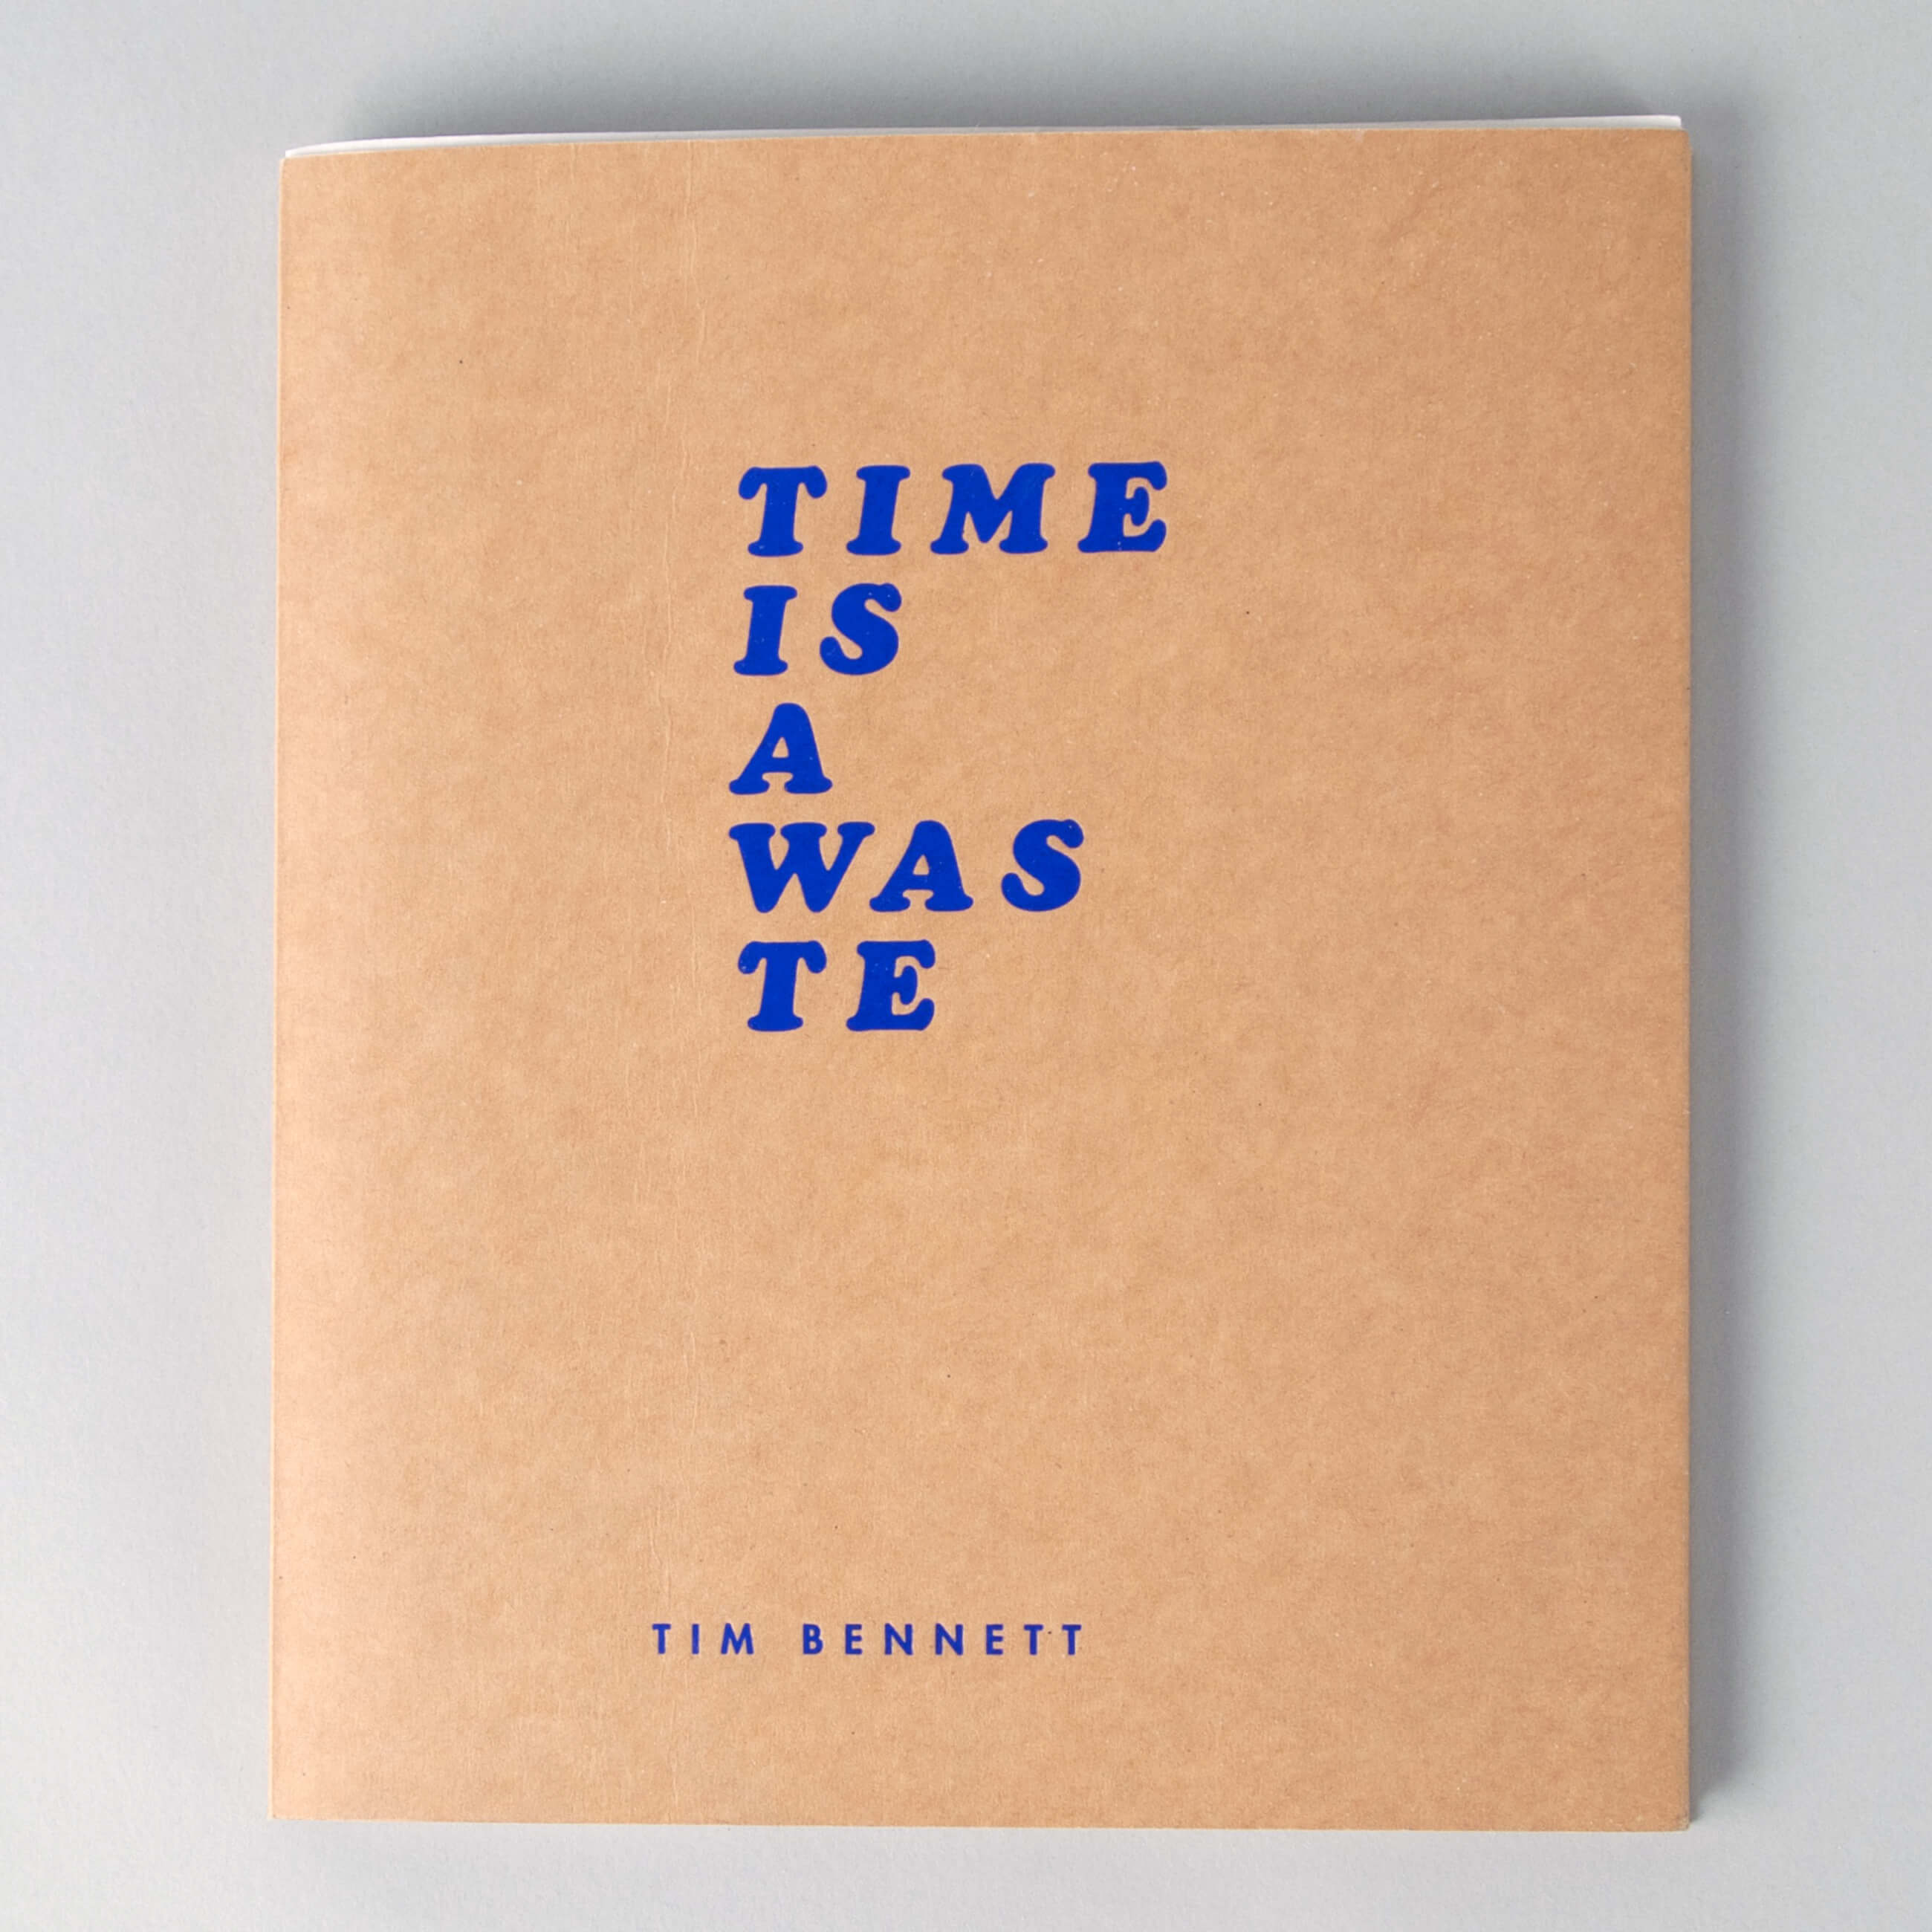 Time is a waste, 2014